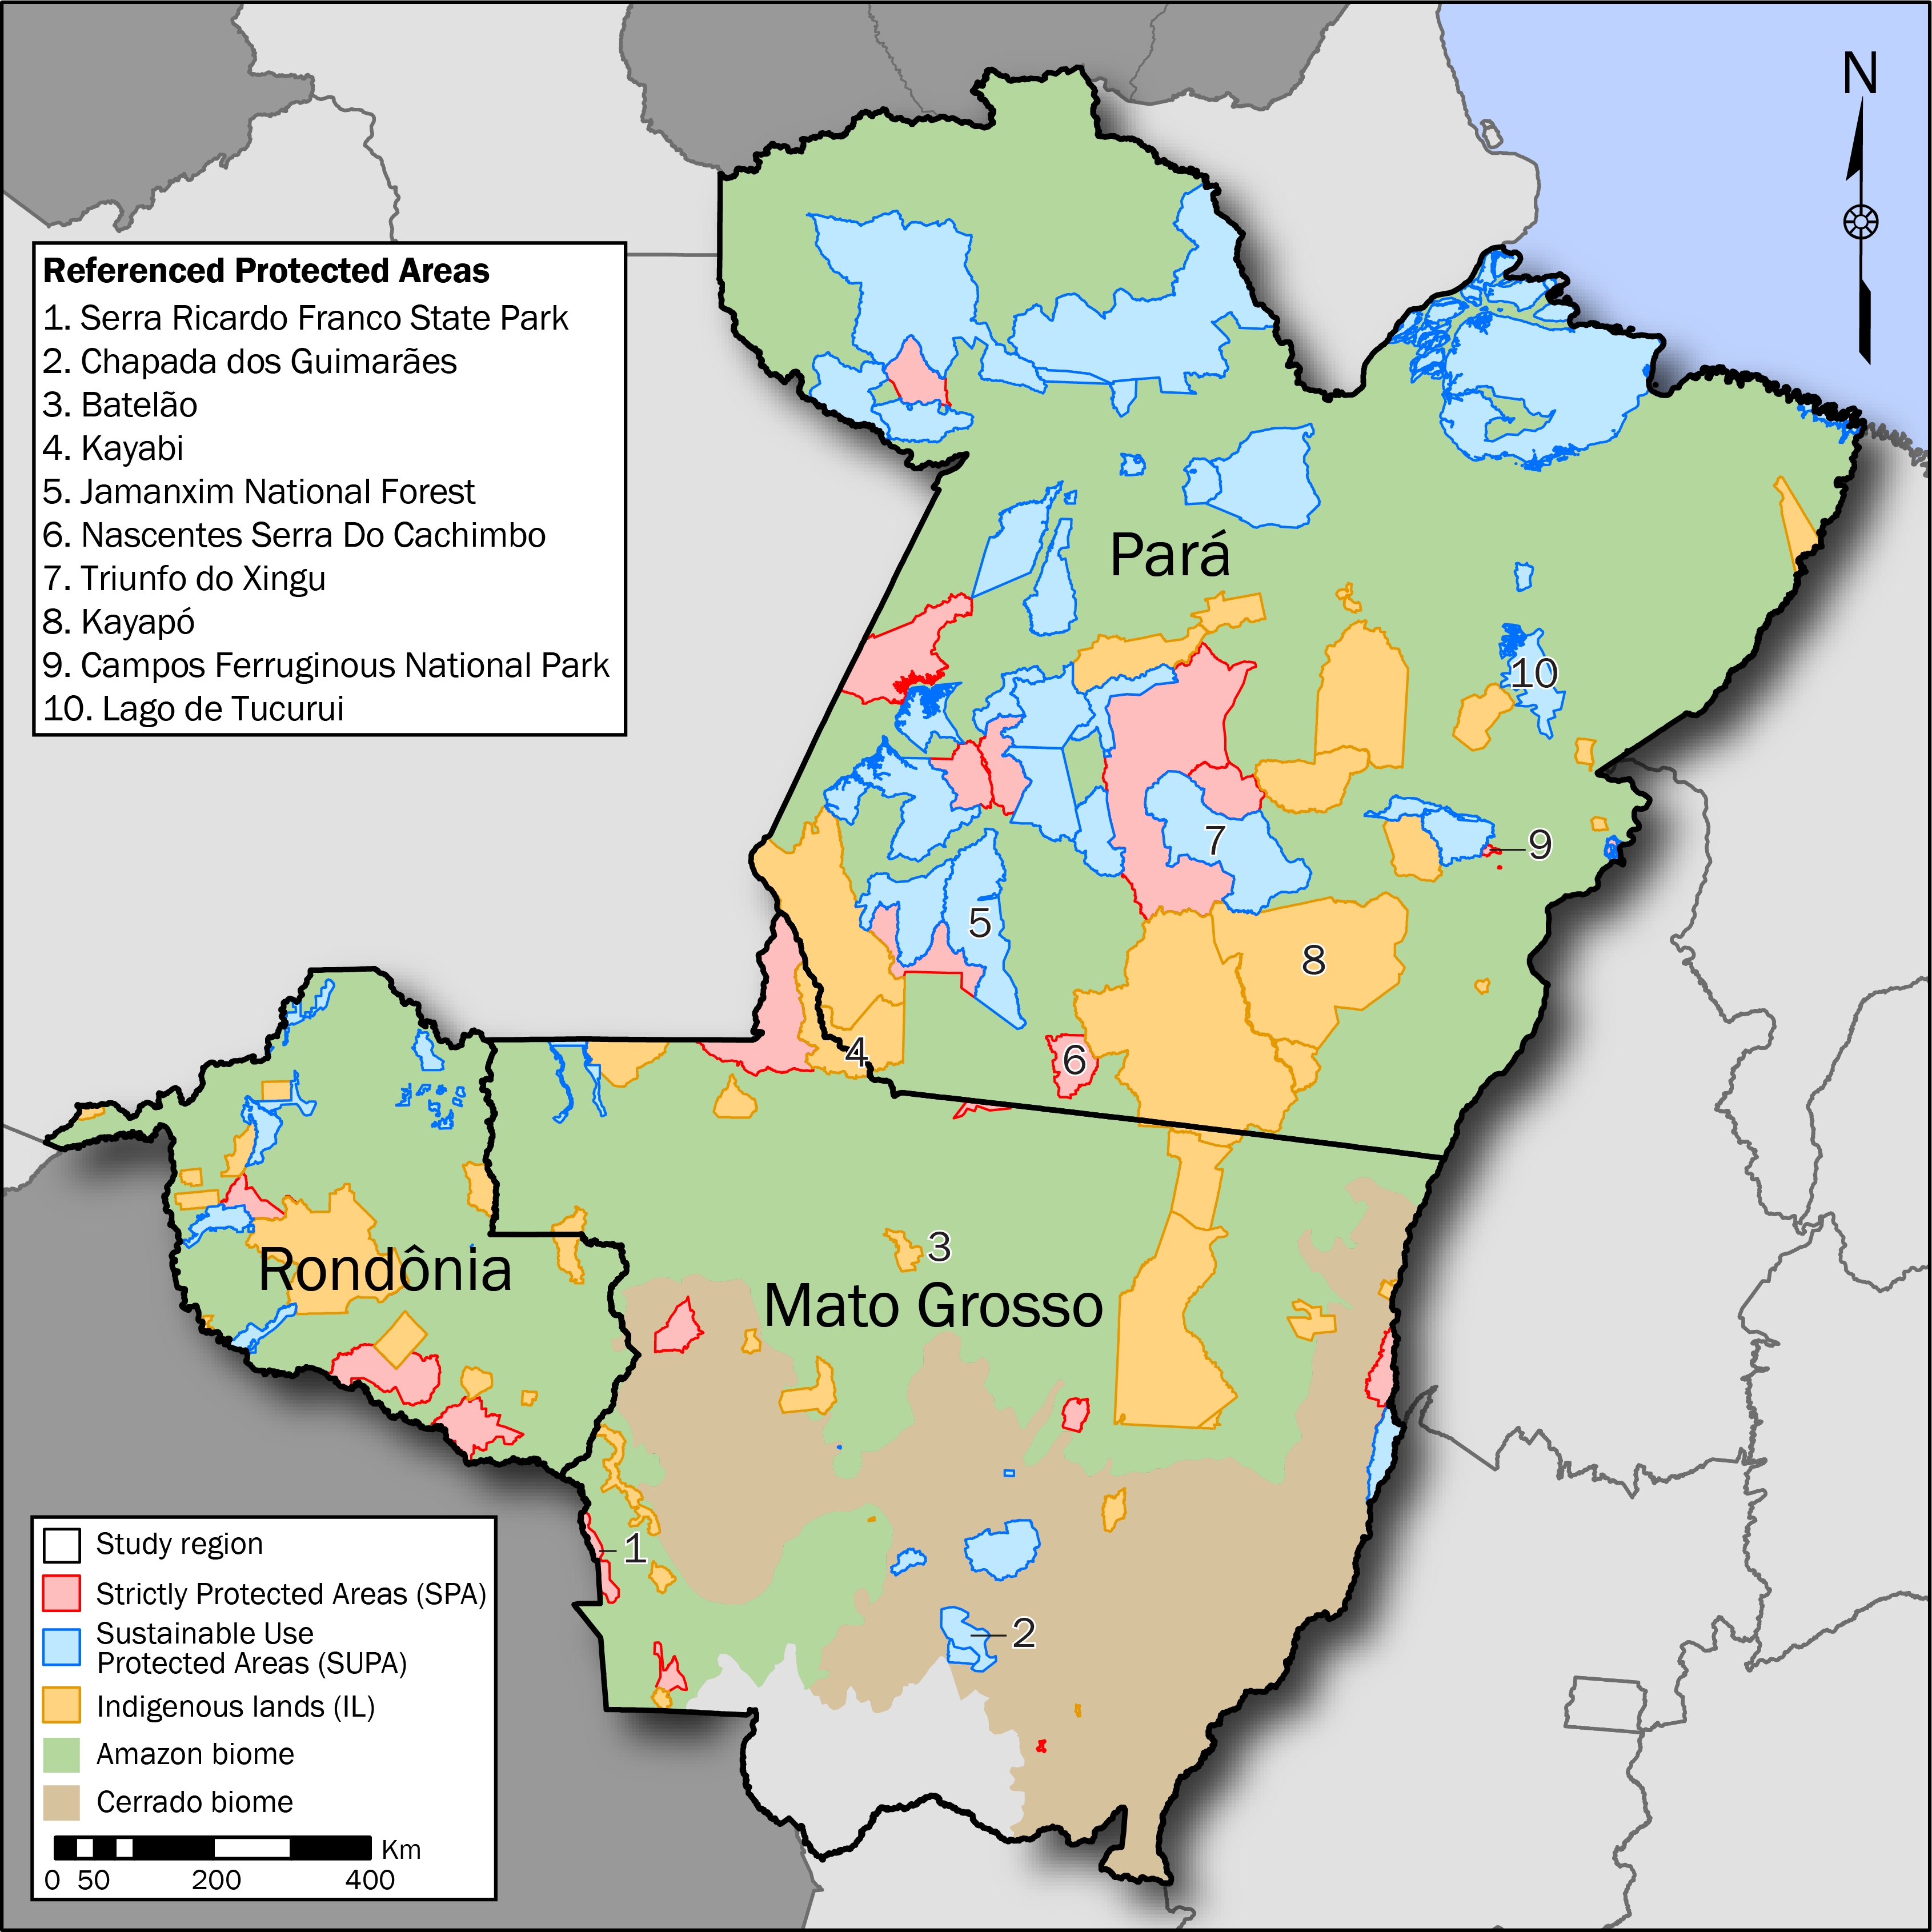 Protected areas from Mato Grosso, Pará, and Rondônia states with private properties linked to cattle transit records from the Brazilian Ministry of Agriculture, Food, and Livestock's Guide to Animal Transport (GTA) database between 2013 to 2018. Figure from West et al 2022.